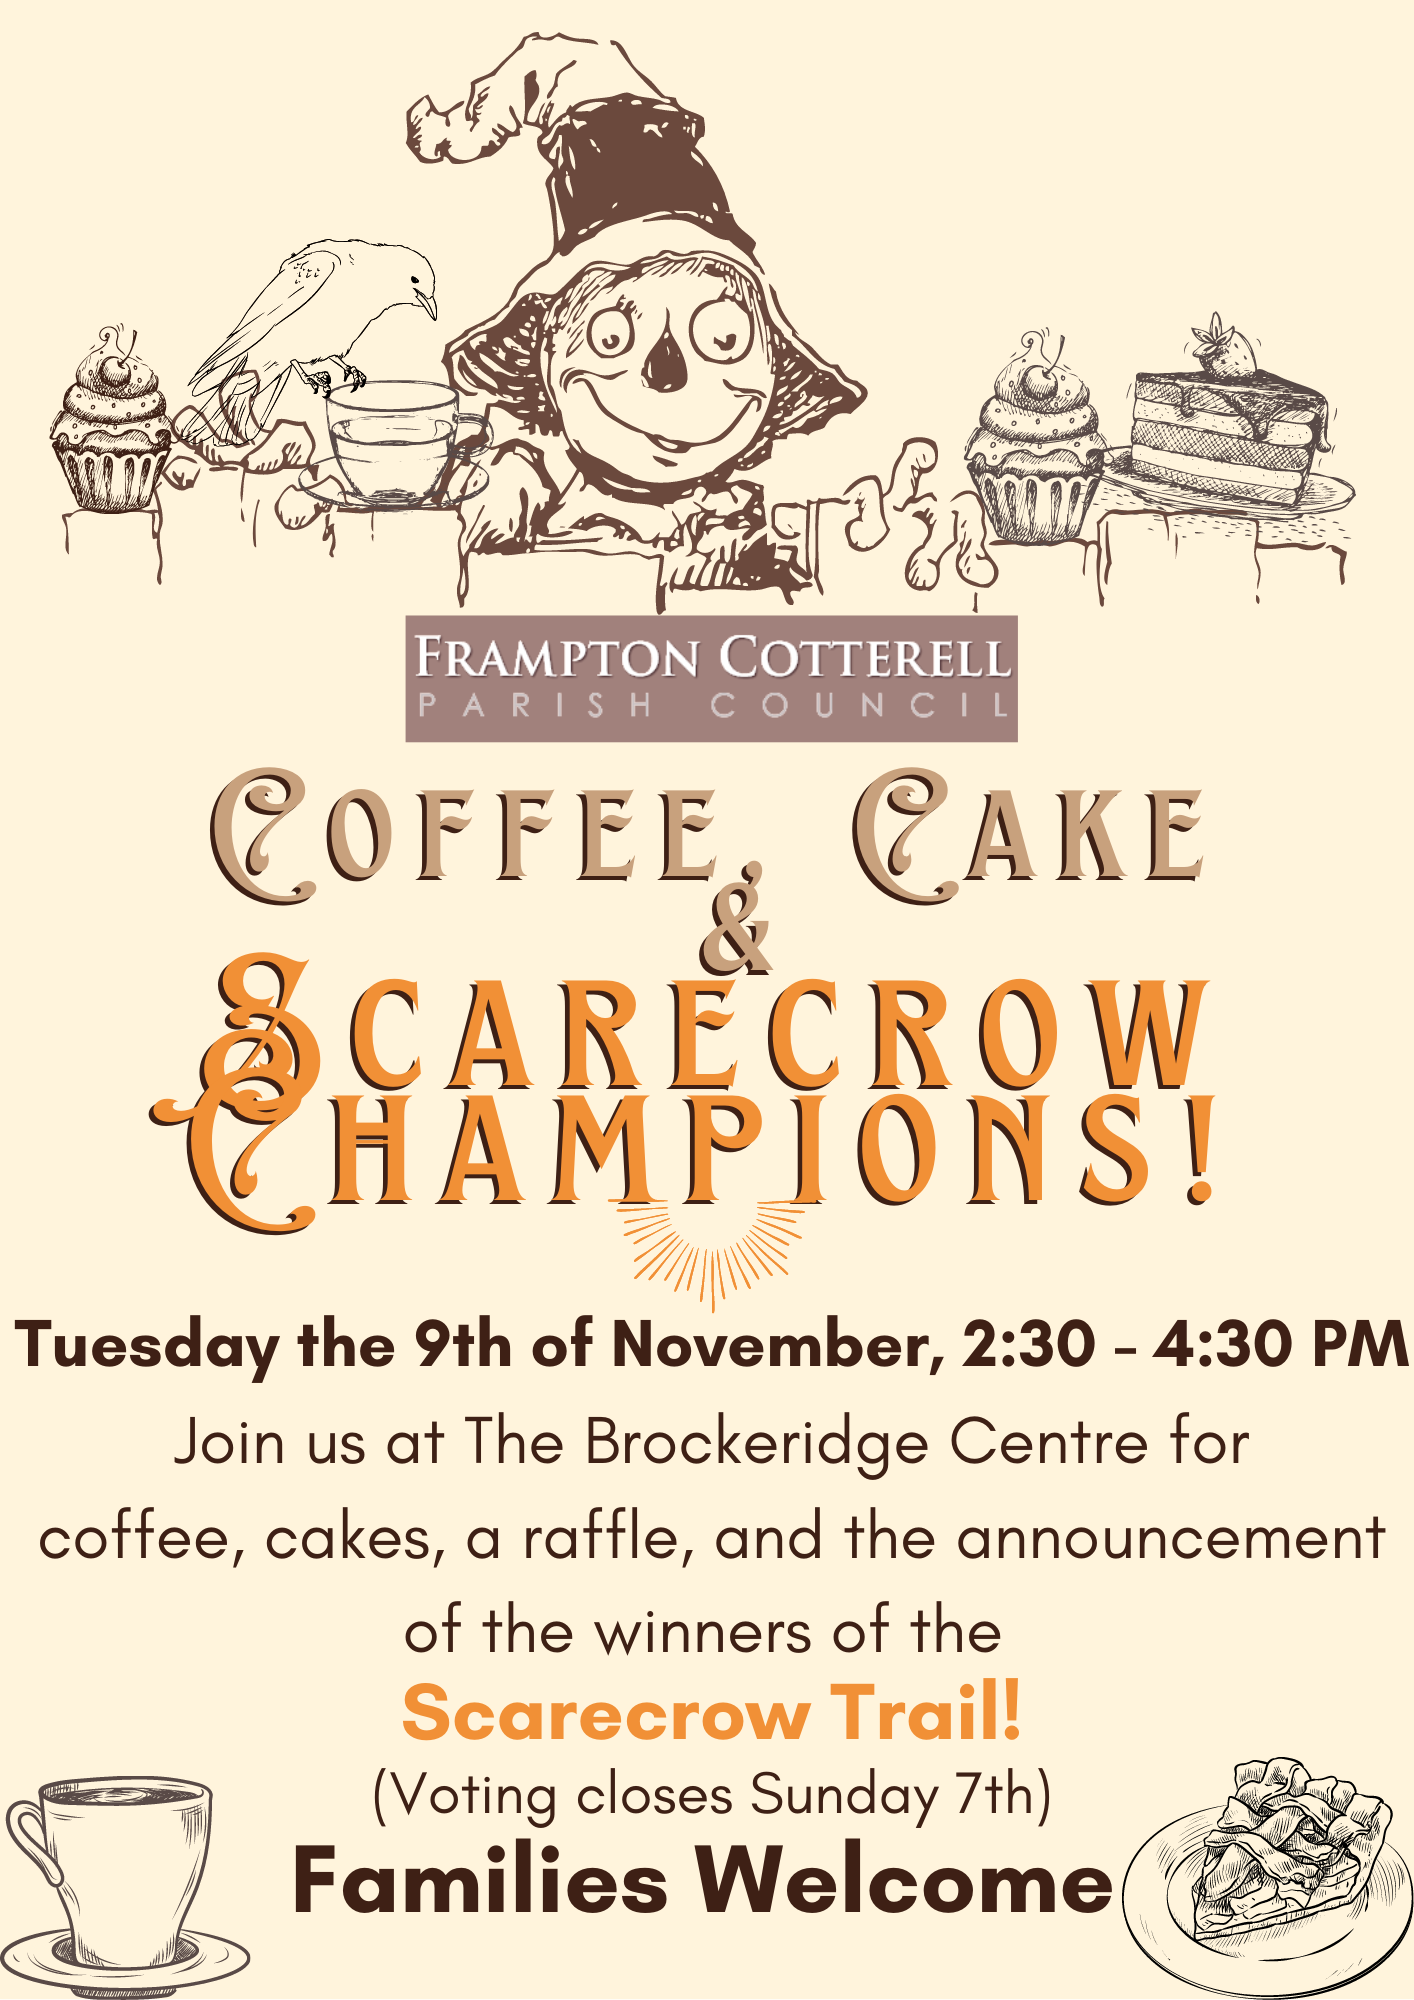 Coffee, Cake, and Scarecrow Champions Event!